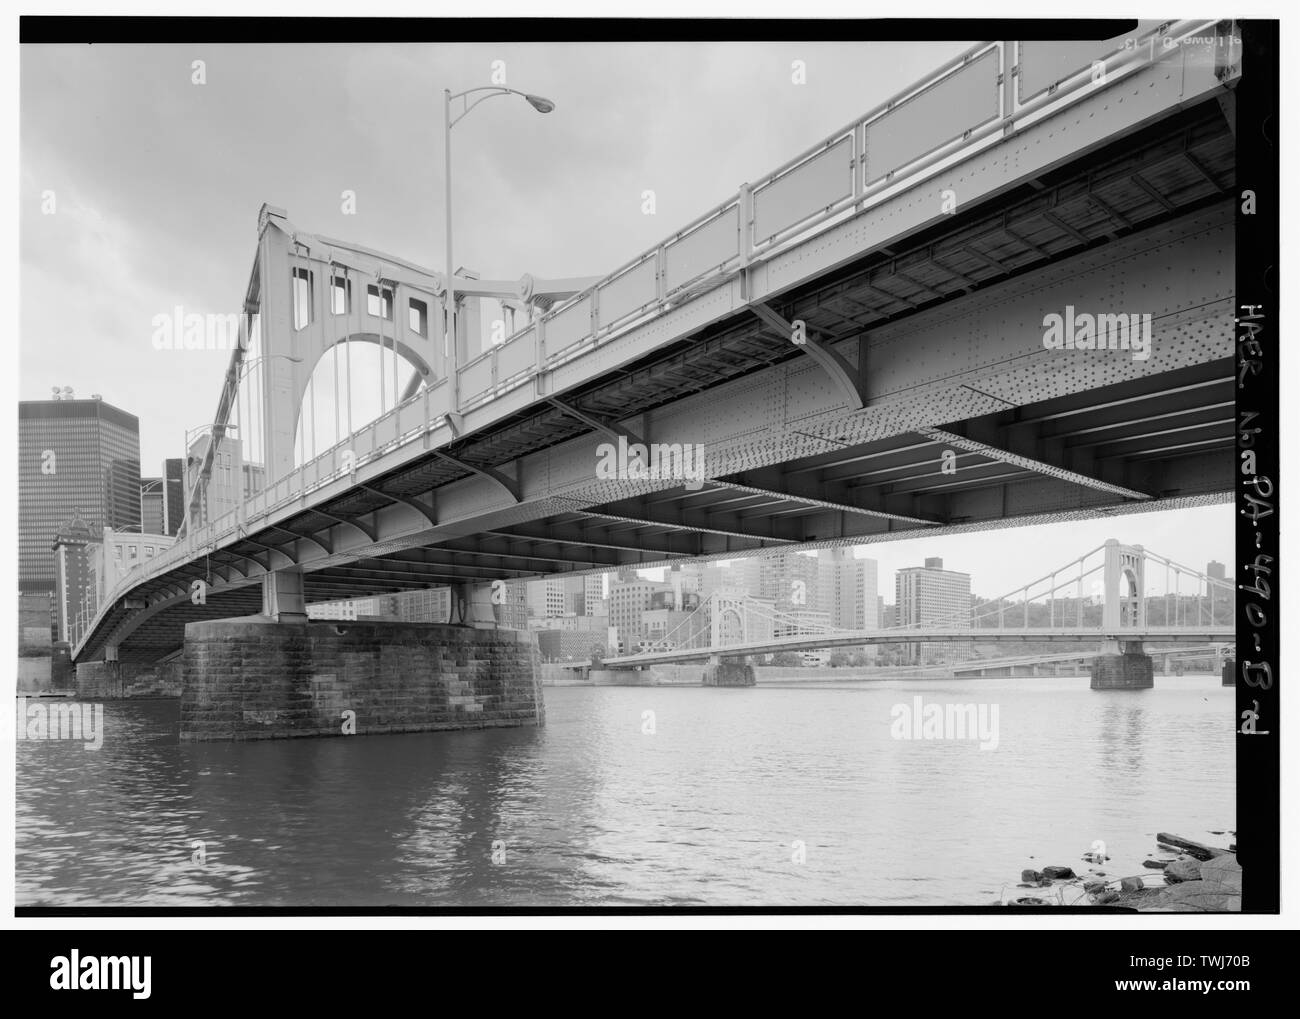 Seventh Street Bridge, looking SW with Sixth Street Bridge in background. - Three Sisters Bridges, Seventh Street Bridge, Spanning Allegheny River at Seventh Street, Pittsburgh, Allegheny County, PA; Covell, Vernon R; Nutter, A D; Roush, Stanley L; Wilkerson, T J; American Bridge Company; Foundation Company; Allegheny County Department of Public Works; Brown, Norman F; Richardson, George S; DeLony, Eric N, project manager; Pennsylvania Department of Transportation, sponsor; Pennsylvania Historical and Museum Commission, sponsor; Lowe, Jet, photographer Stock Photo